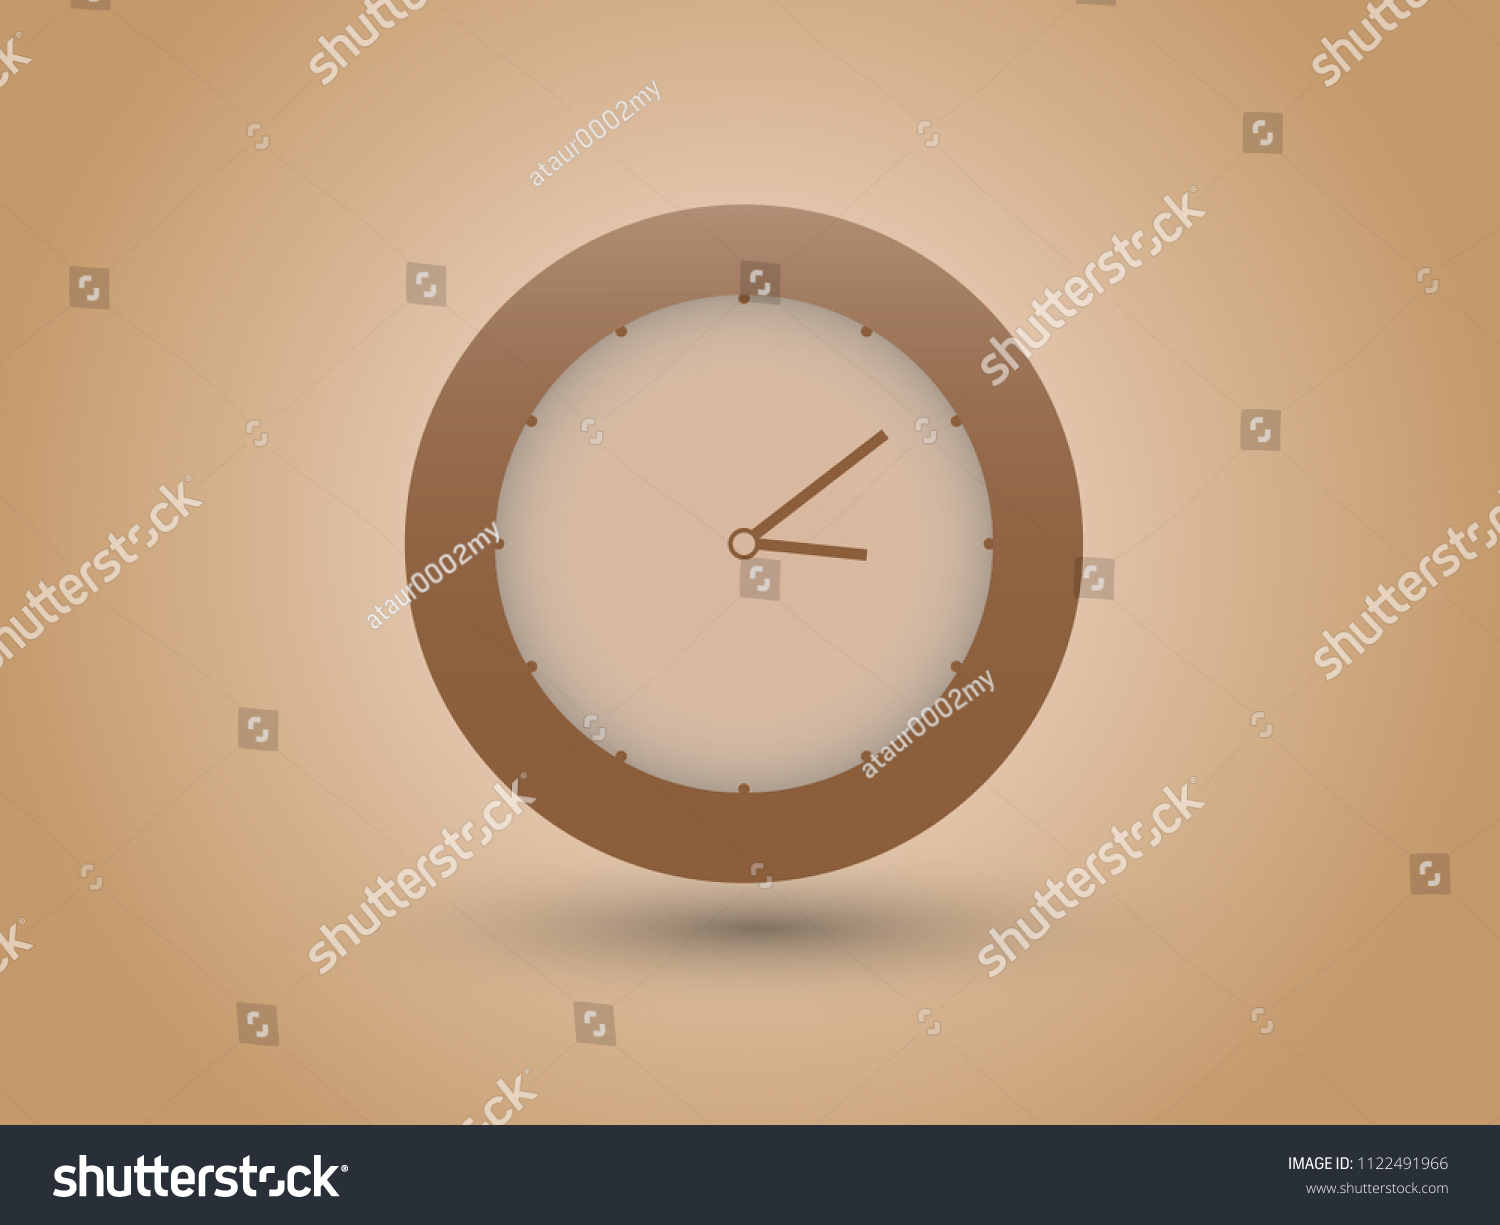 A maroon and brown wall round clock to watch time vector illustration #1122491966